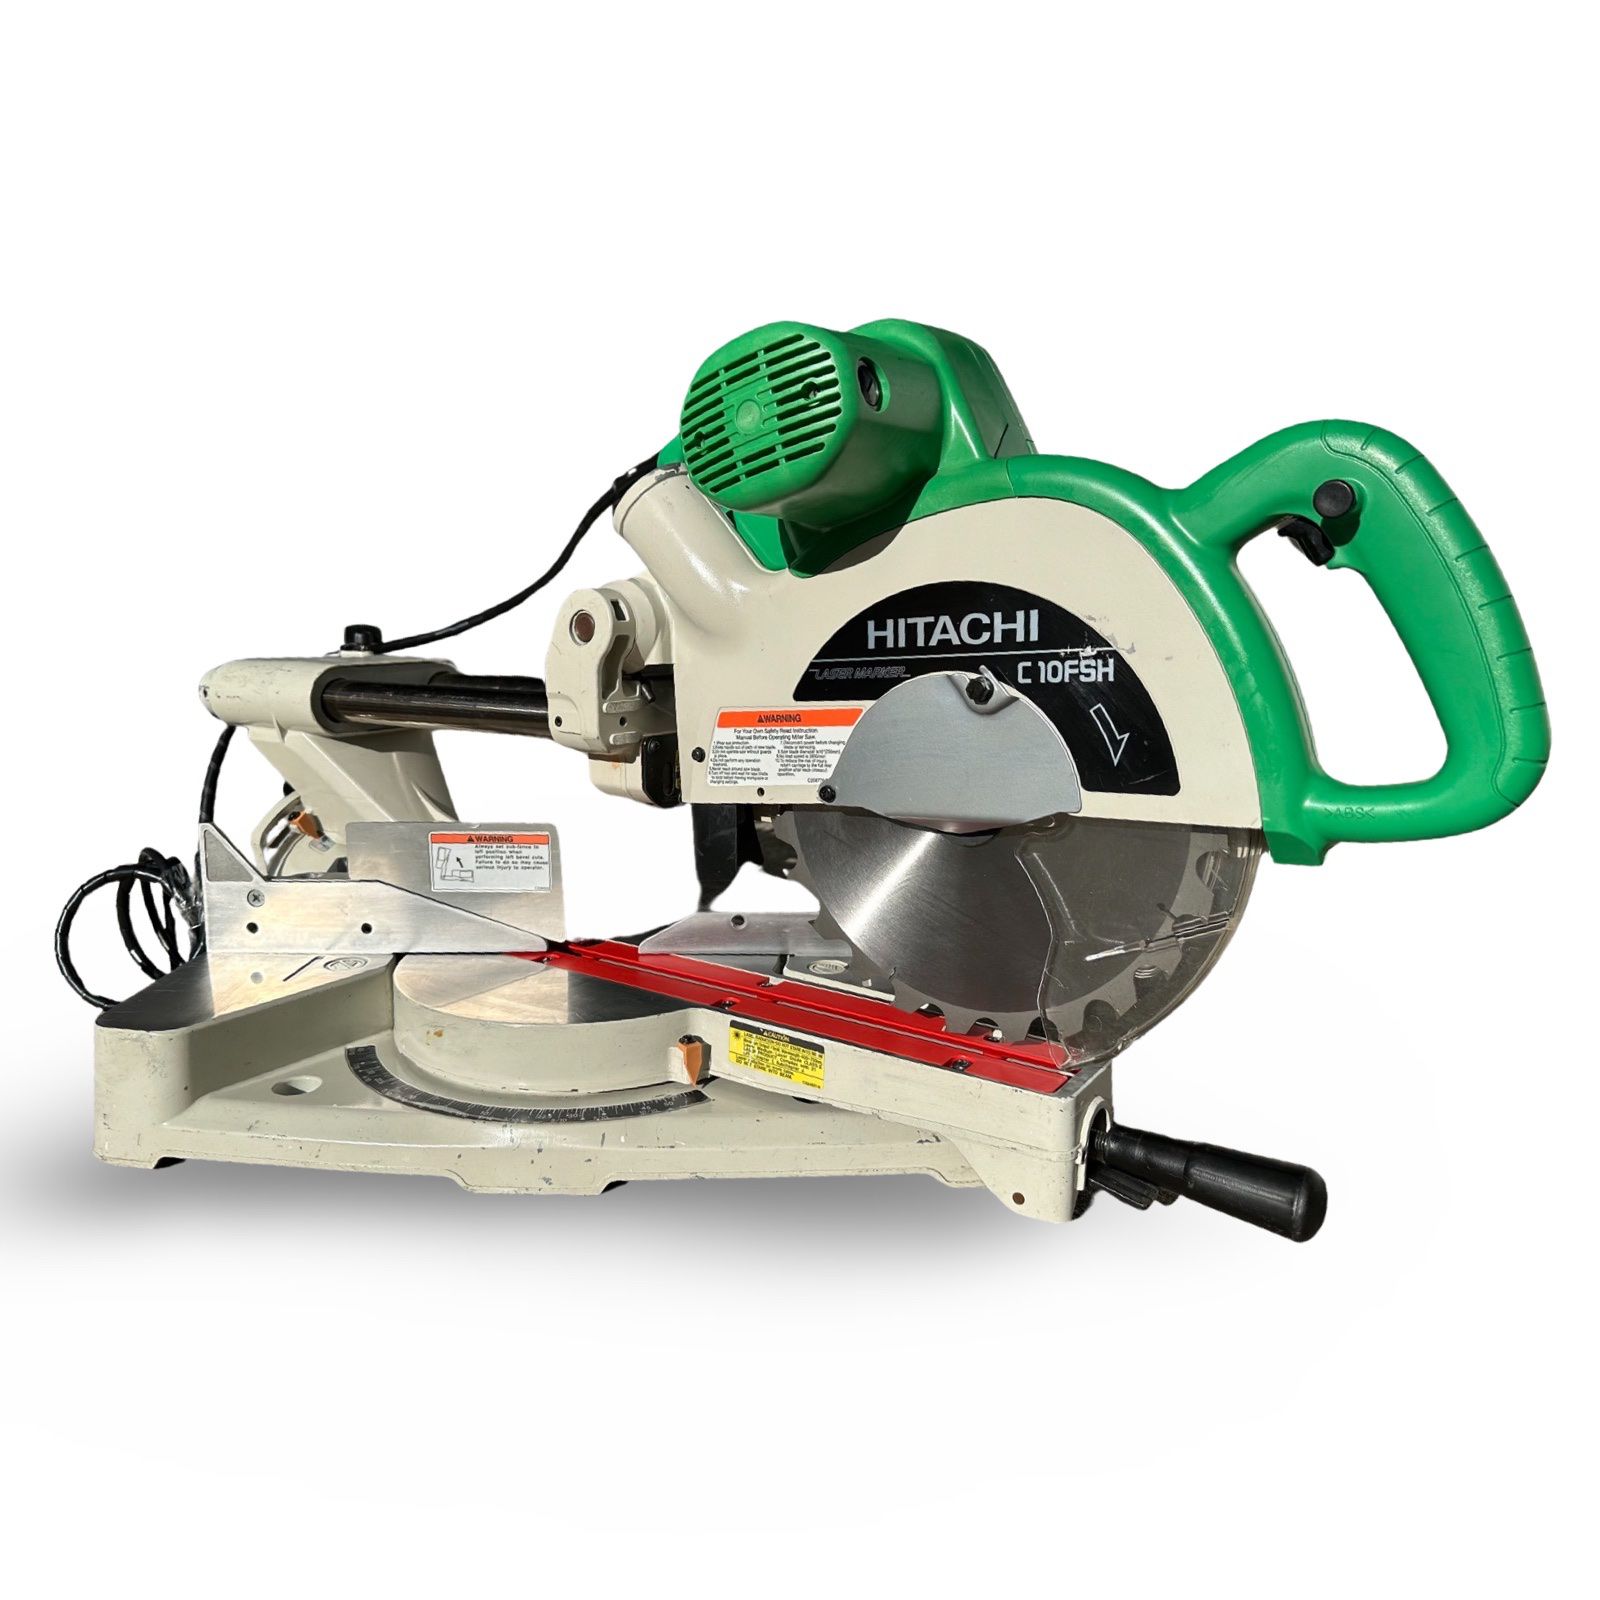 Hitachi C10FSH 10” Dual Bevel Sliding Compound Miter Saw Crafted In Japan Clean!